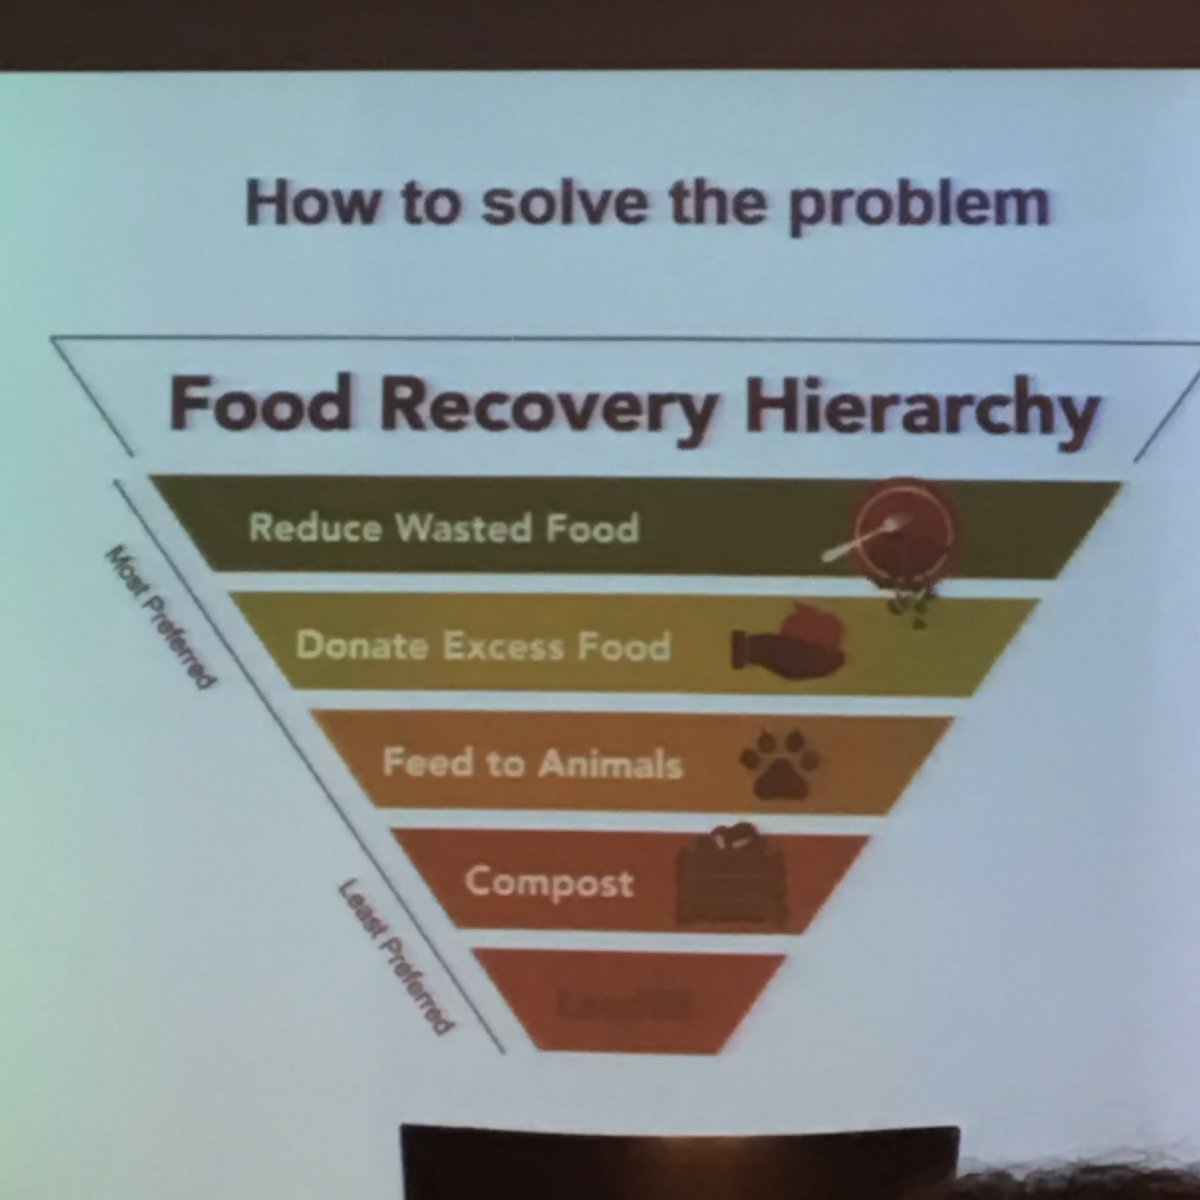 So exciting to be learning about food waste reduction at #AHIF @AHIF_News Thanks @WinnowSolutions for the insights.